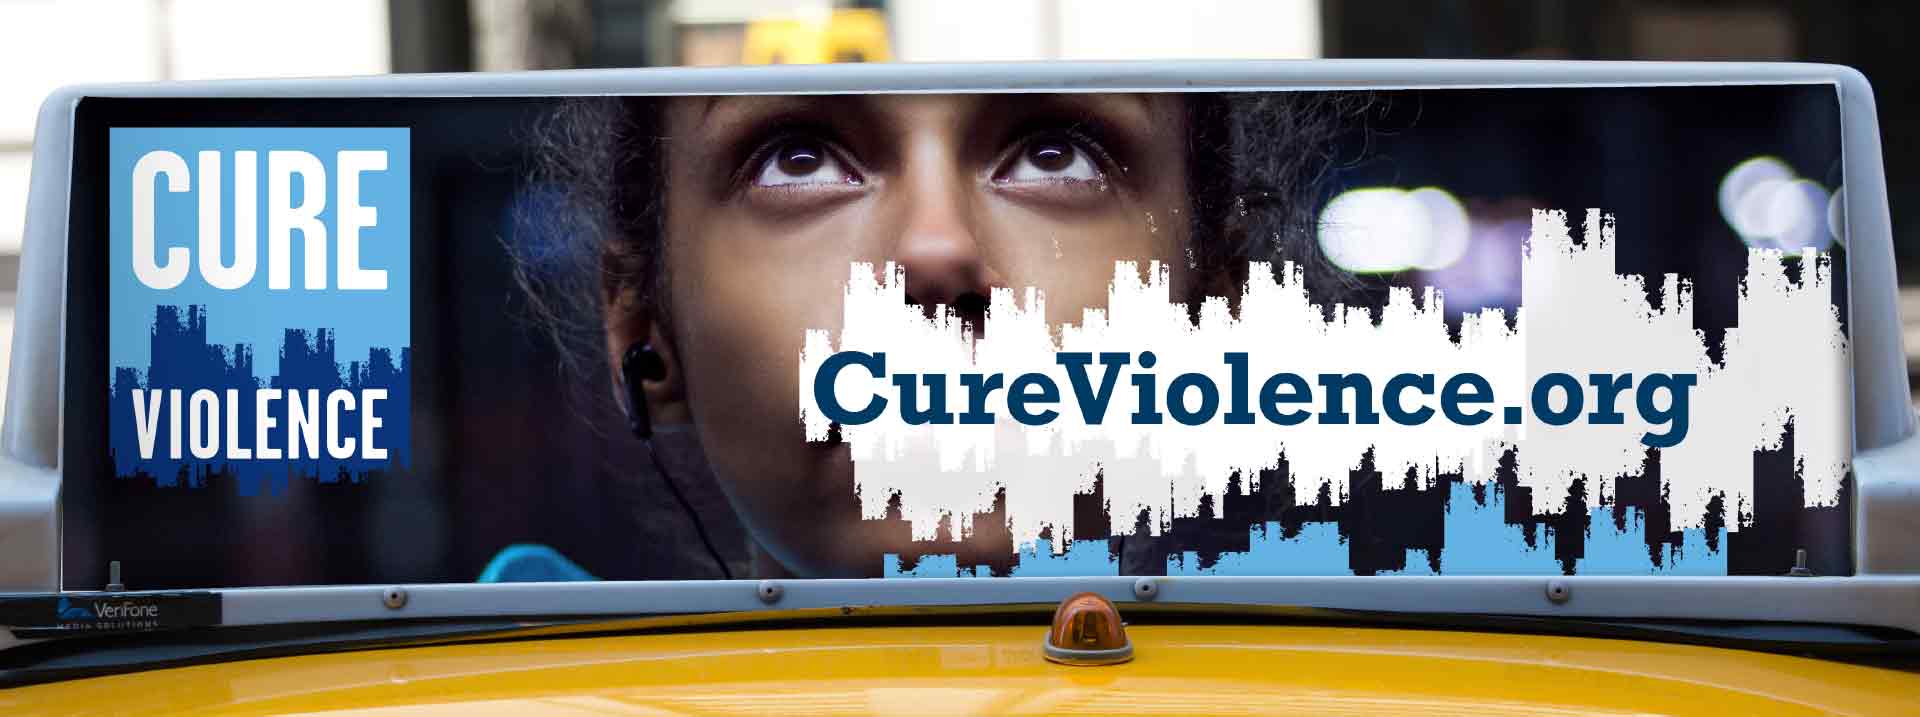 cure violence taxi advertisement